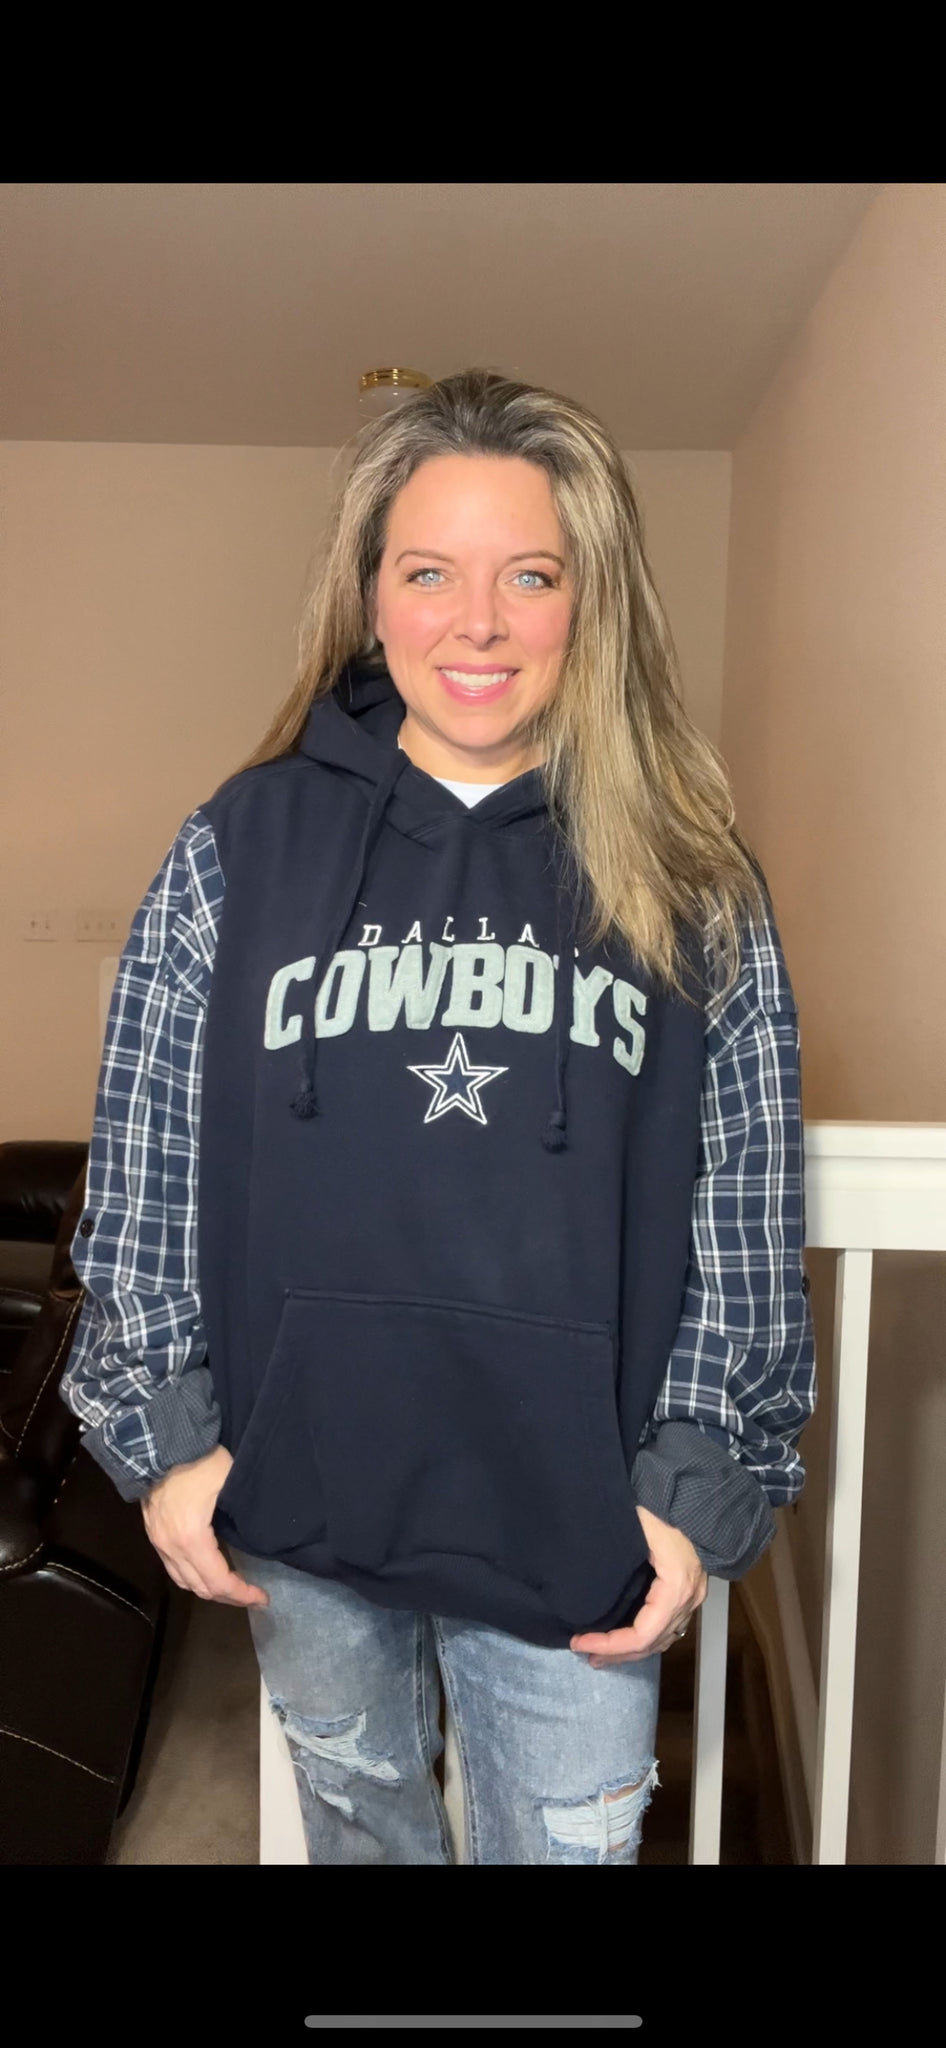 Cowboys - woman’s 1X - thick sweatshirt with flannel sleeves ￼